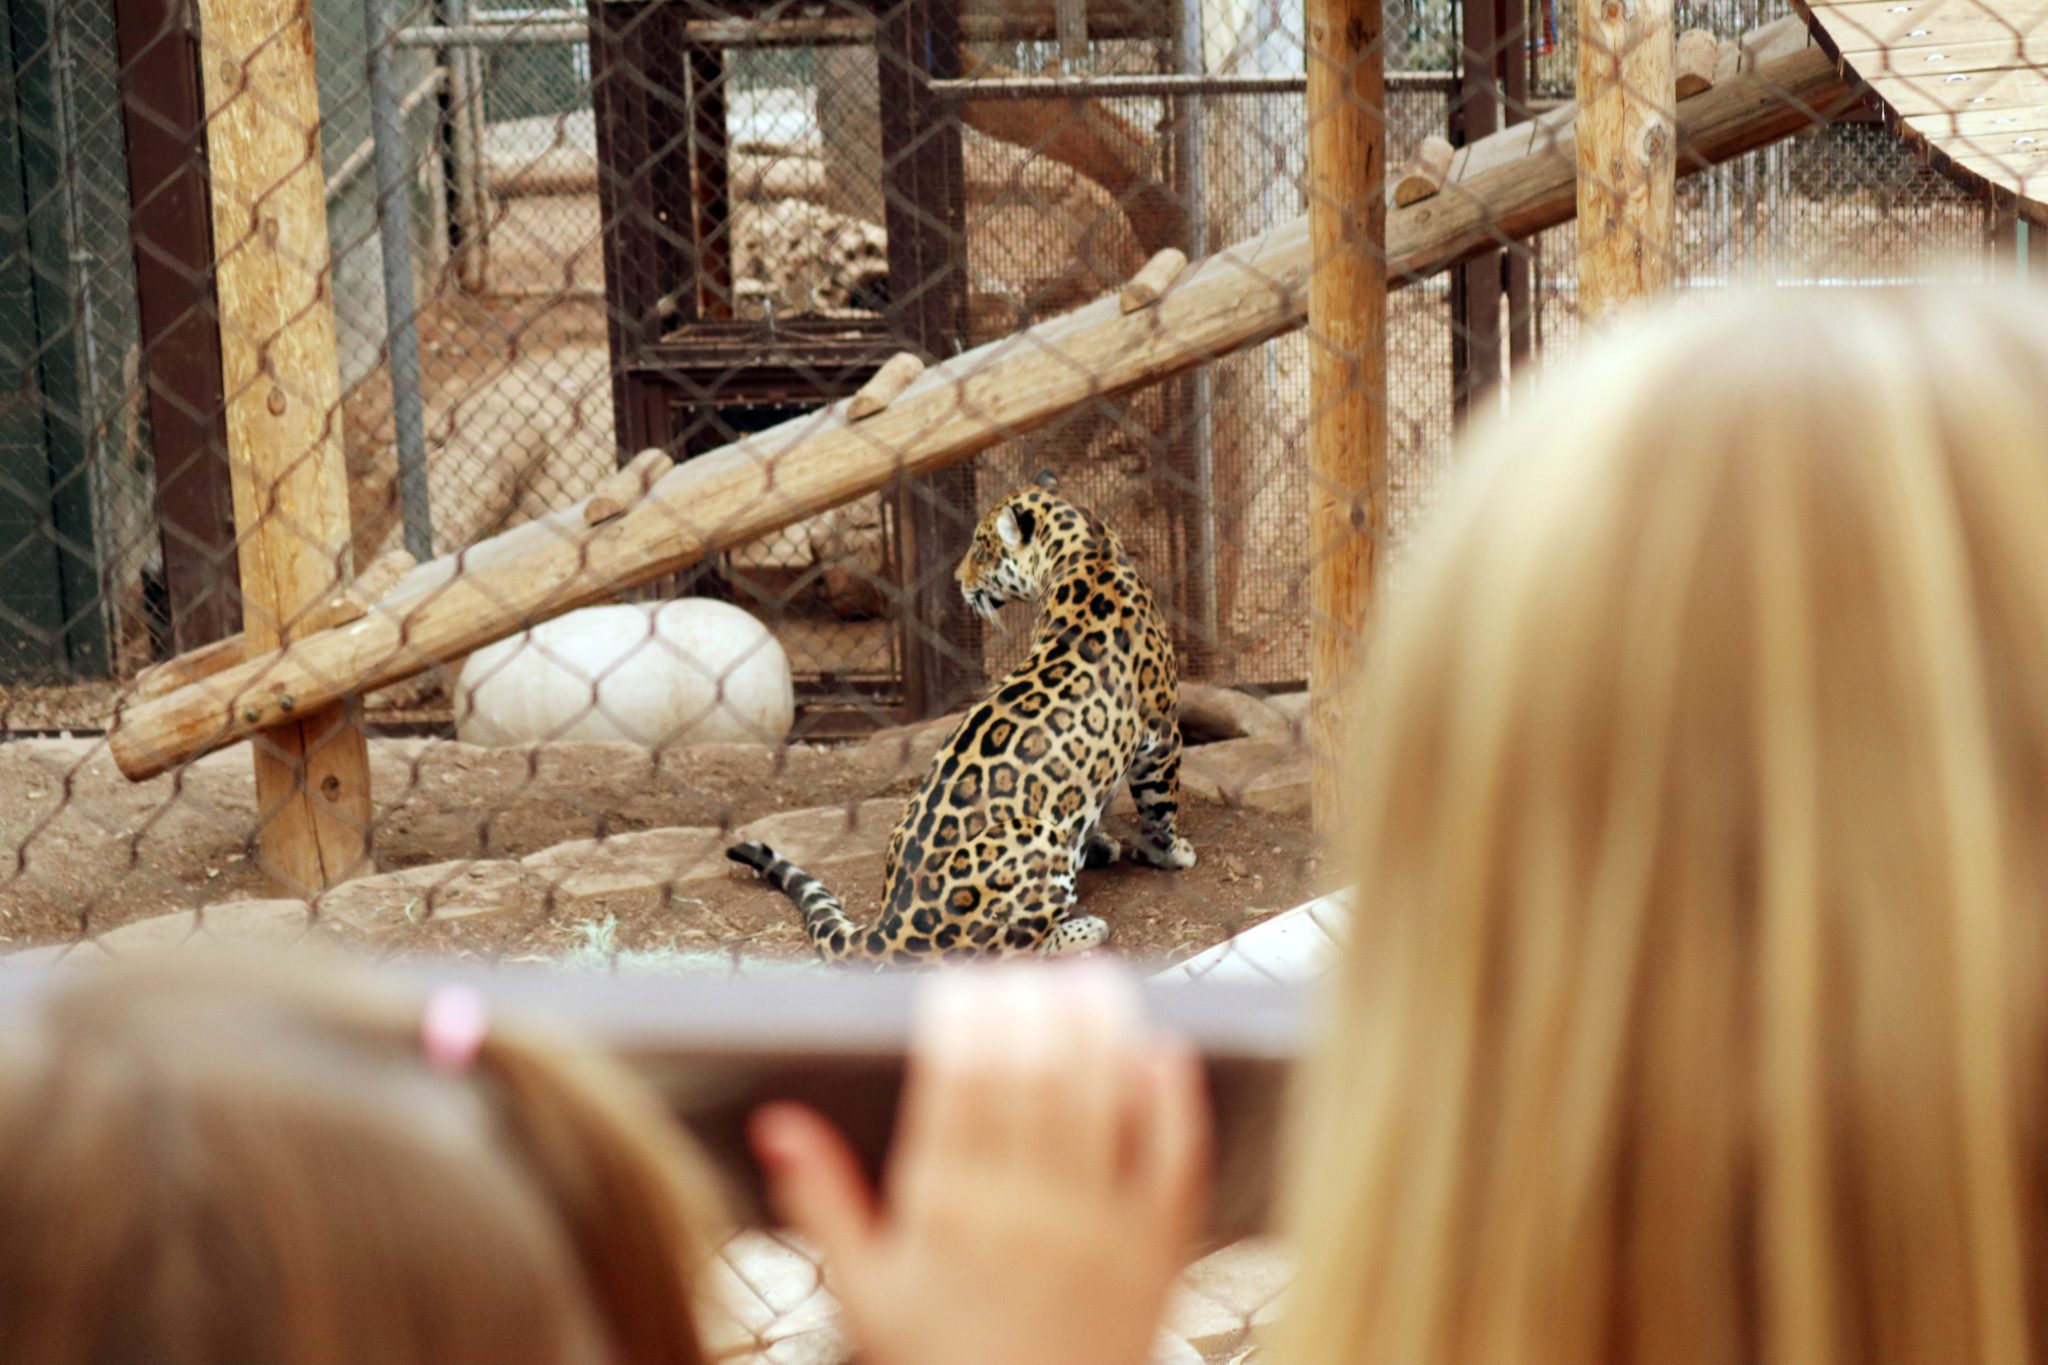 Best nature and animal encounters for kids in Phoenix and the East Valley-101 East Valley and Phoenix Kids activities #phoenix #arizona #phoenixzoo